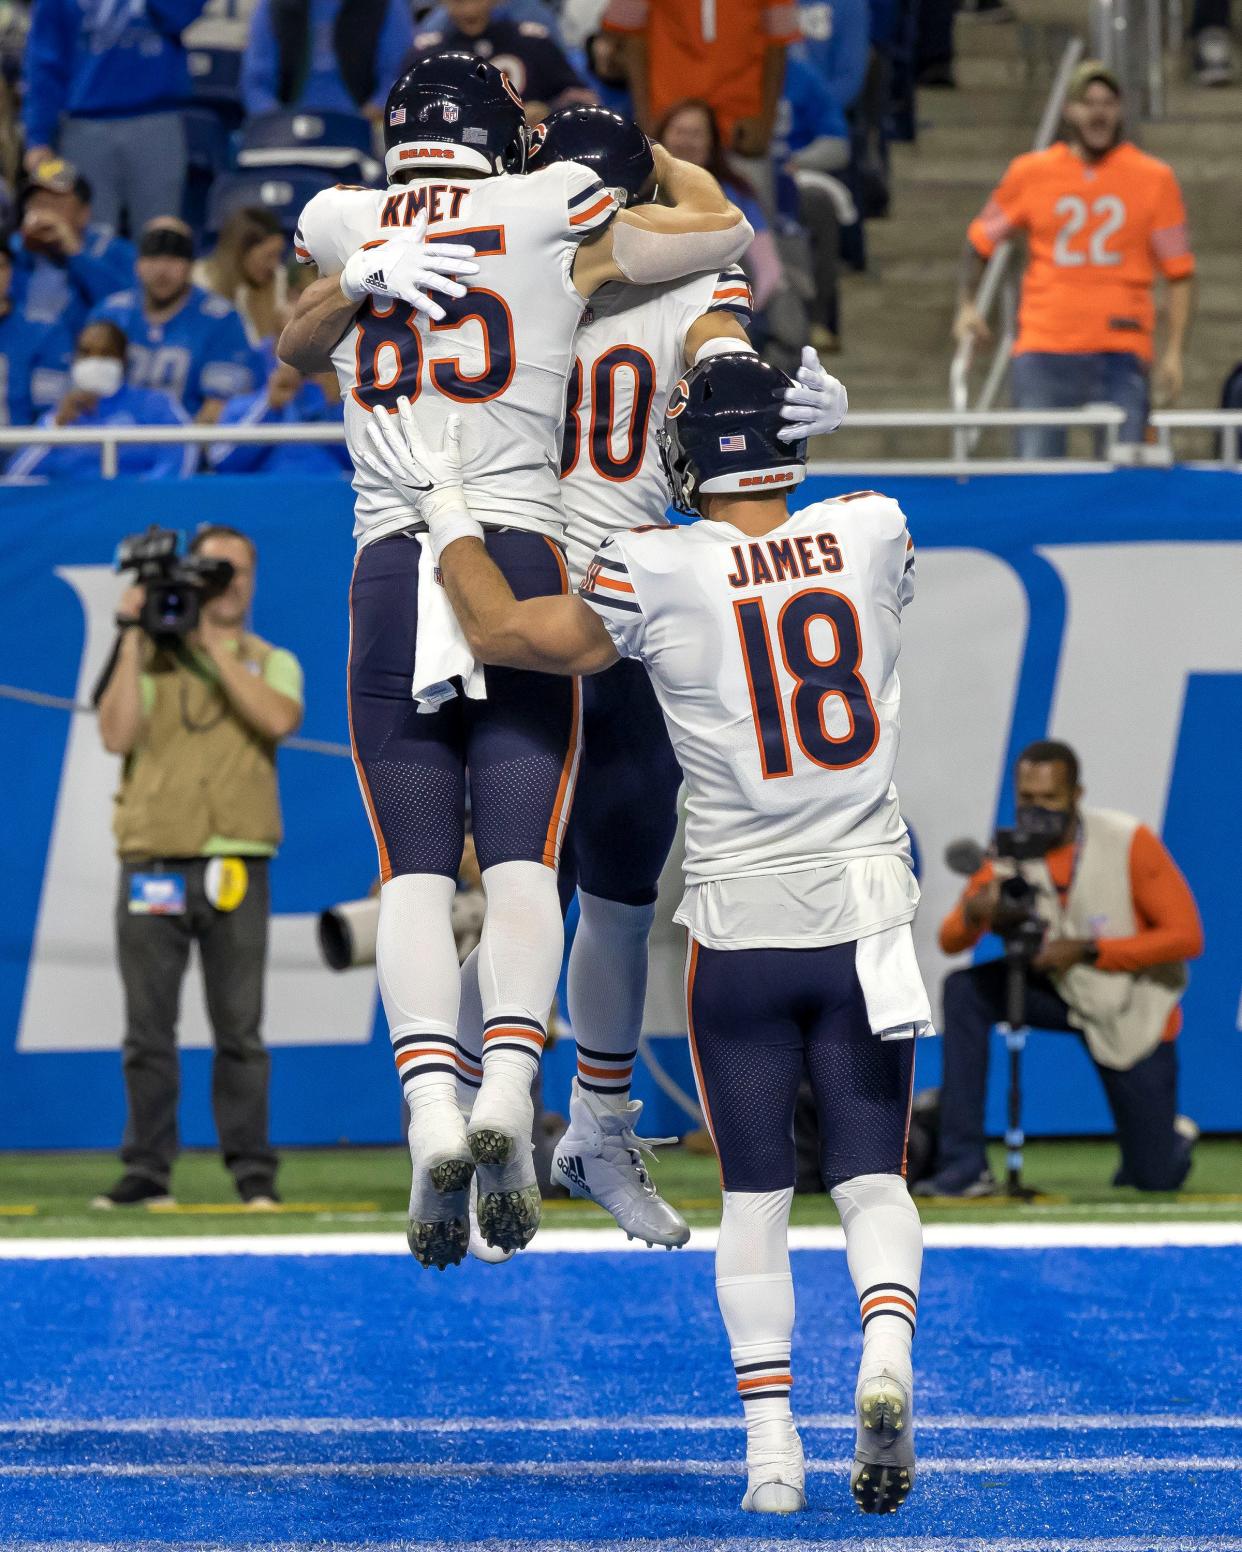 Nov 25, 2021; Detroit, Michigan, USA; Chicago Bears tight end Jimmy Graham (80) celebrates a touchdown with tight end Cole Kmet (85) and wide receiver Jon'Vea Johnson (18) in the second quarter against the Detroit Lions at Ford Field. Mandatory Credit: David Reginek-USA TODAY Sports